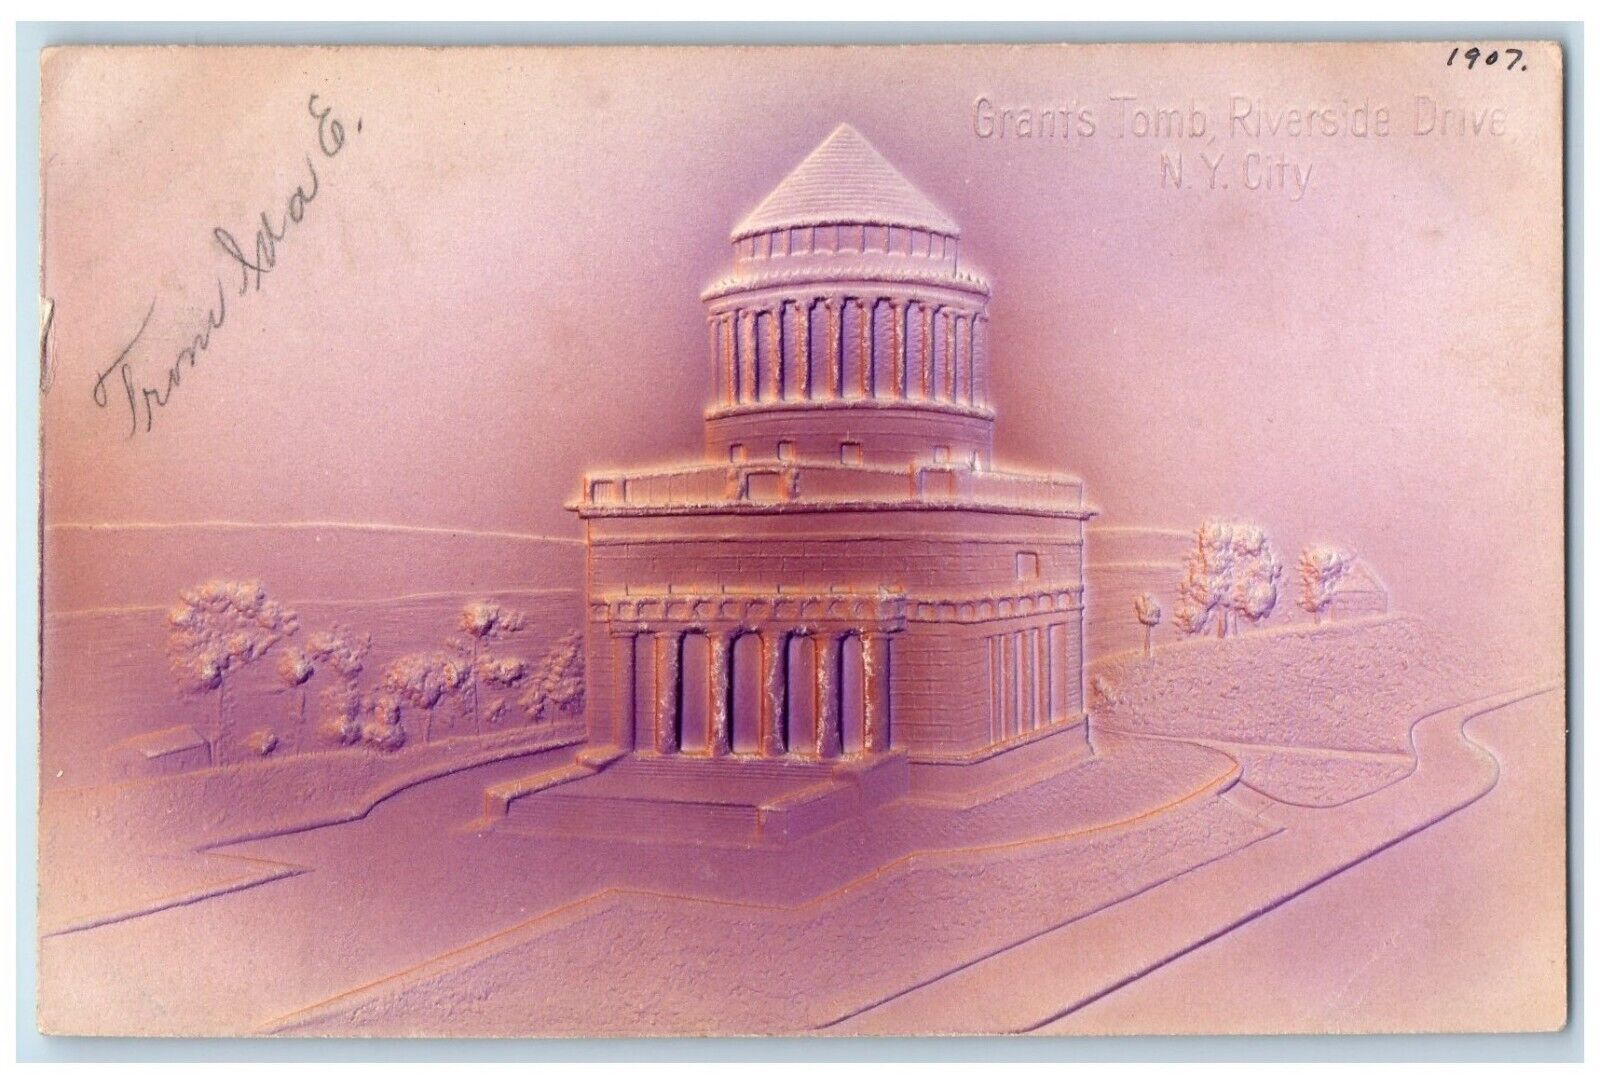 1907 Grant\'s Tomb Riverside Drive New York City NY Embossed Airbrushed Postcard